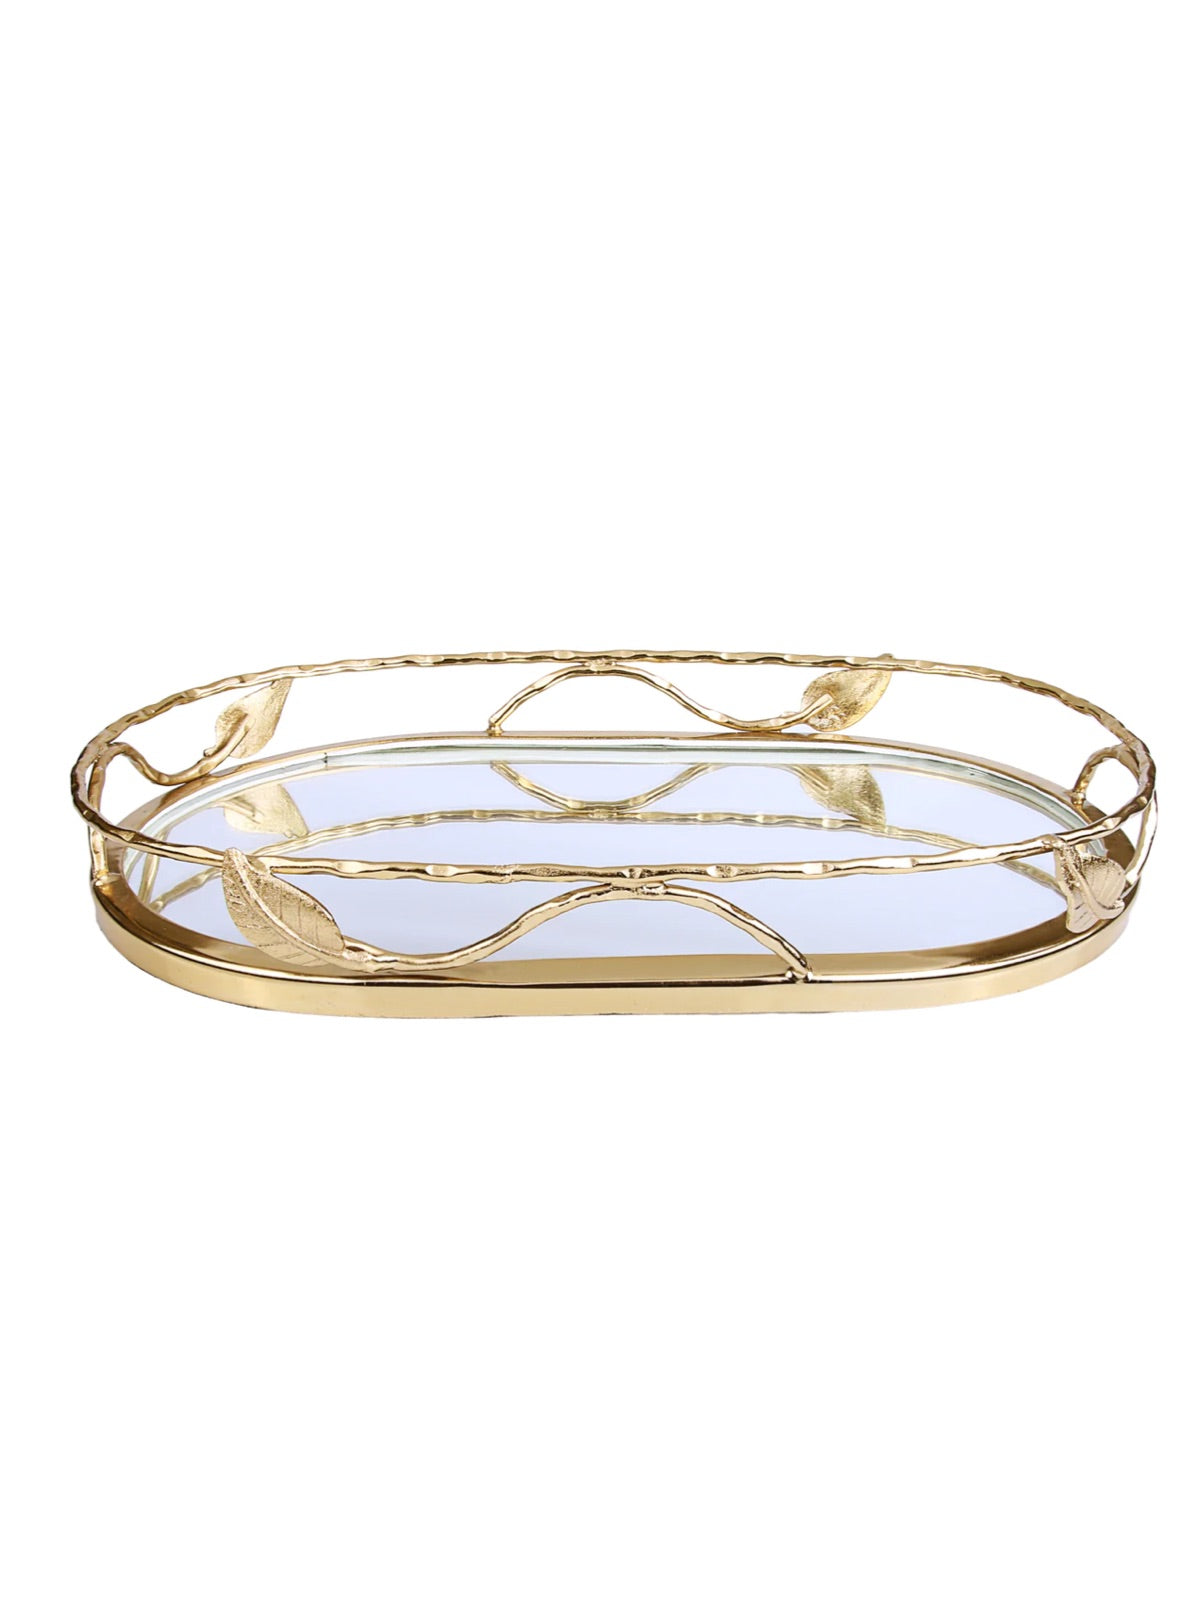 Oval mirror decorative tray with luxury gold leaf designed metal frame sold by KYA Home Decor.